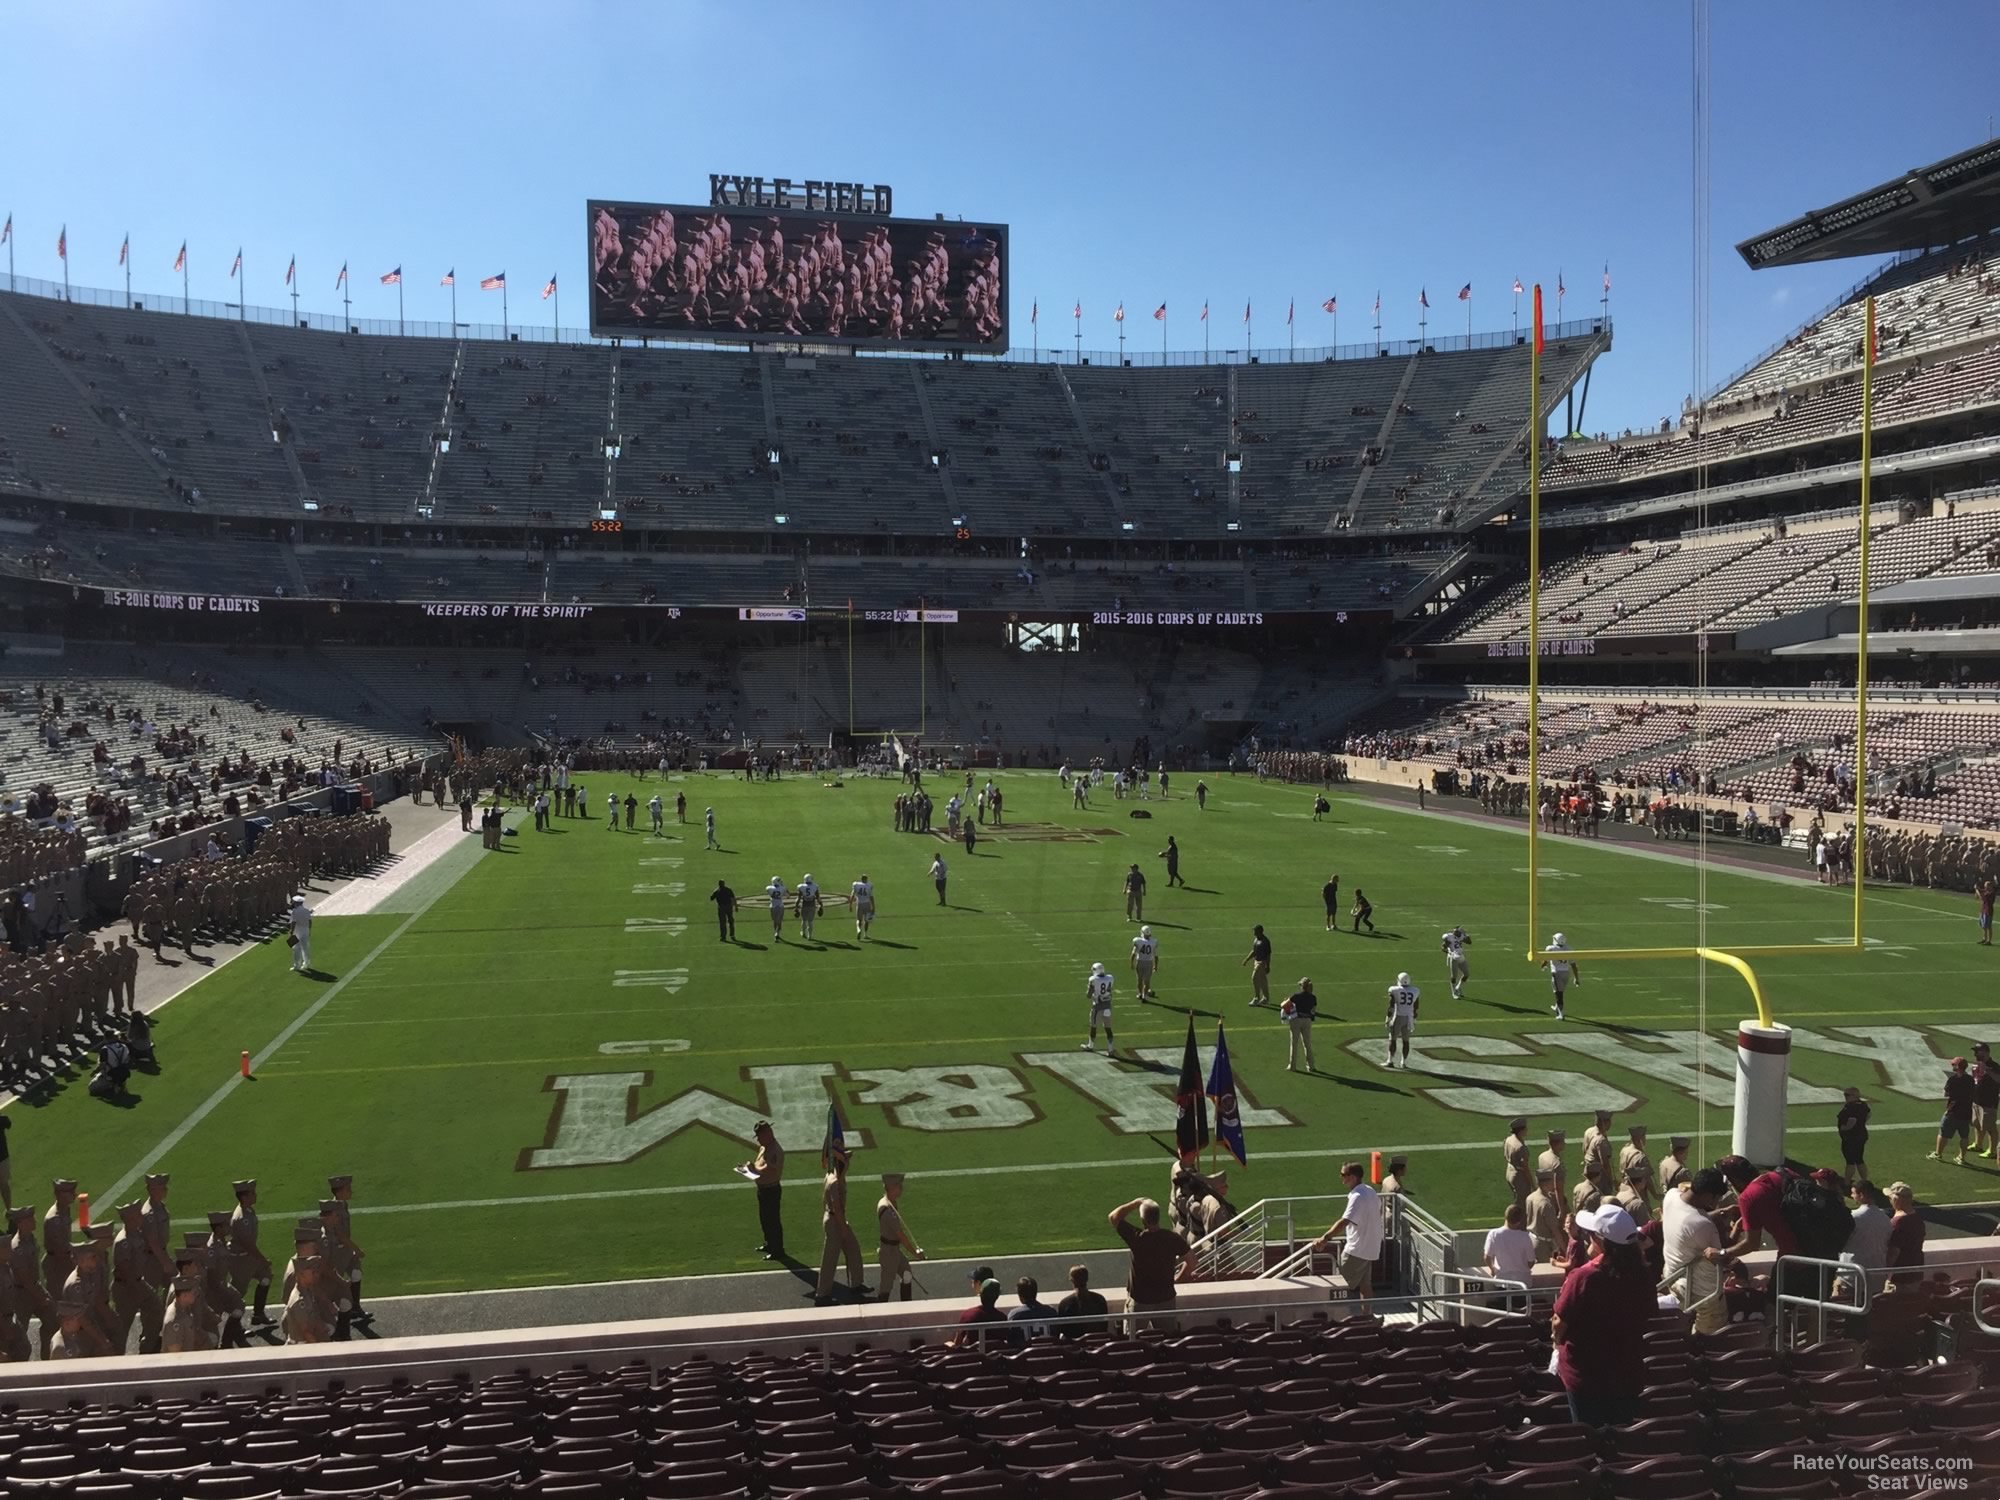 section 118, row 20 seat view  - kyle field